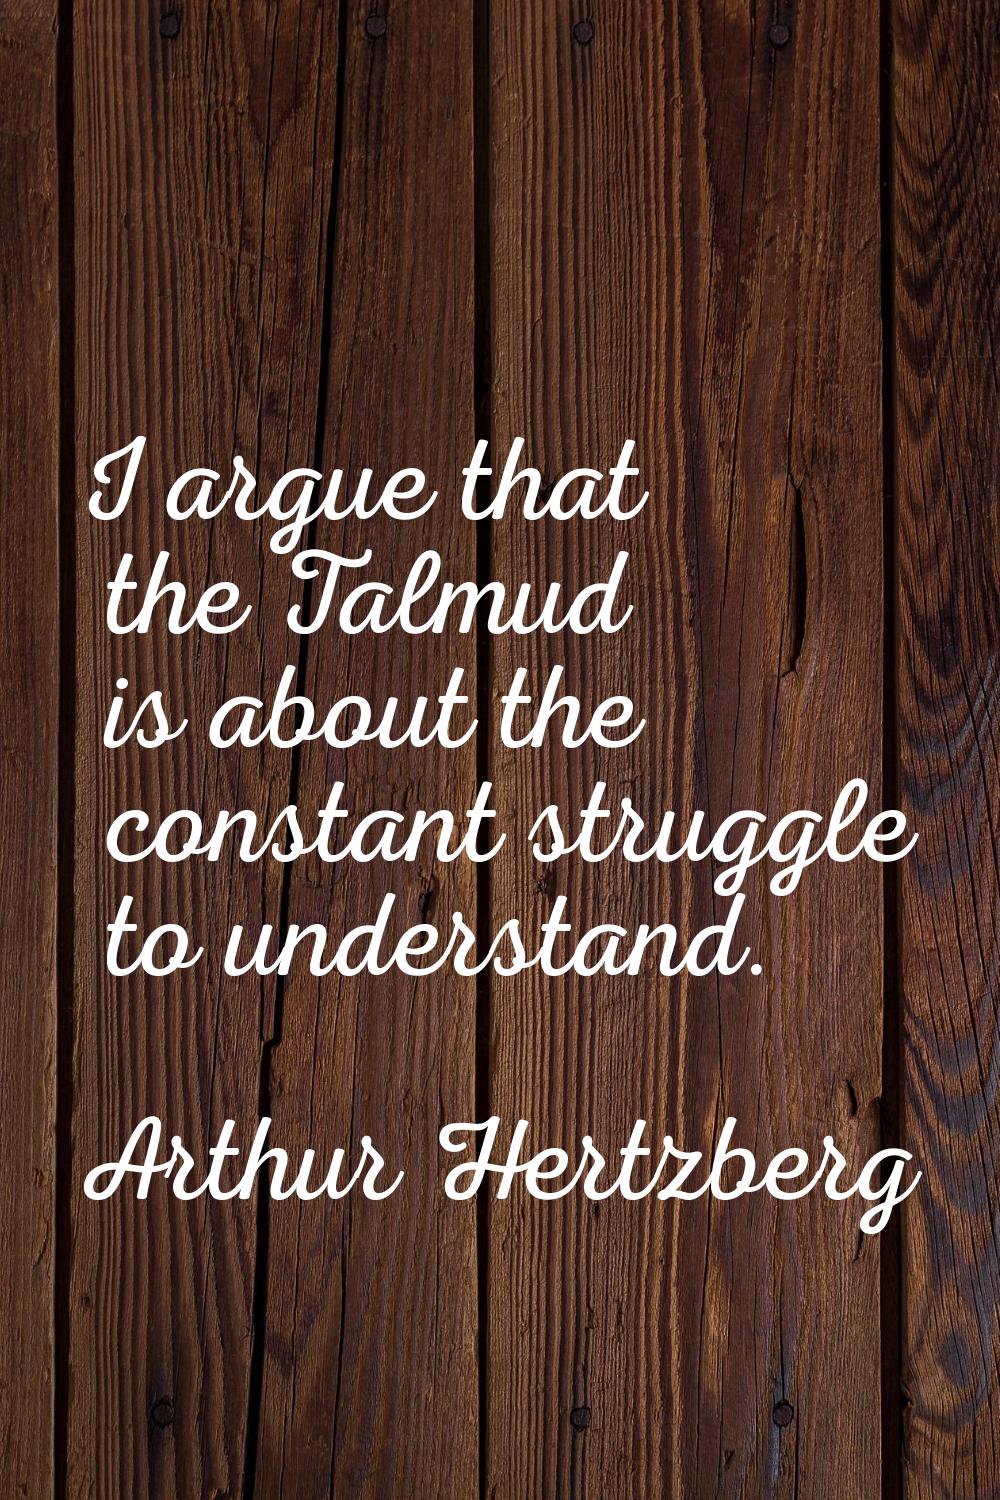 I argue that the Talmud is about the constant struggle to understand.